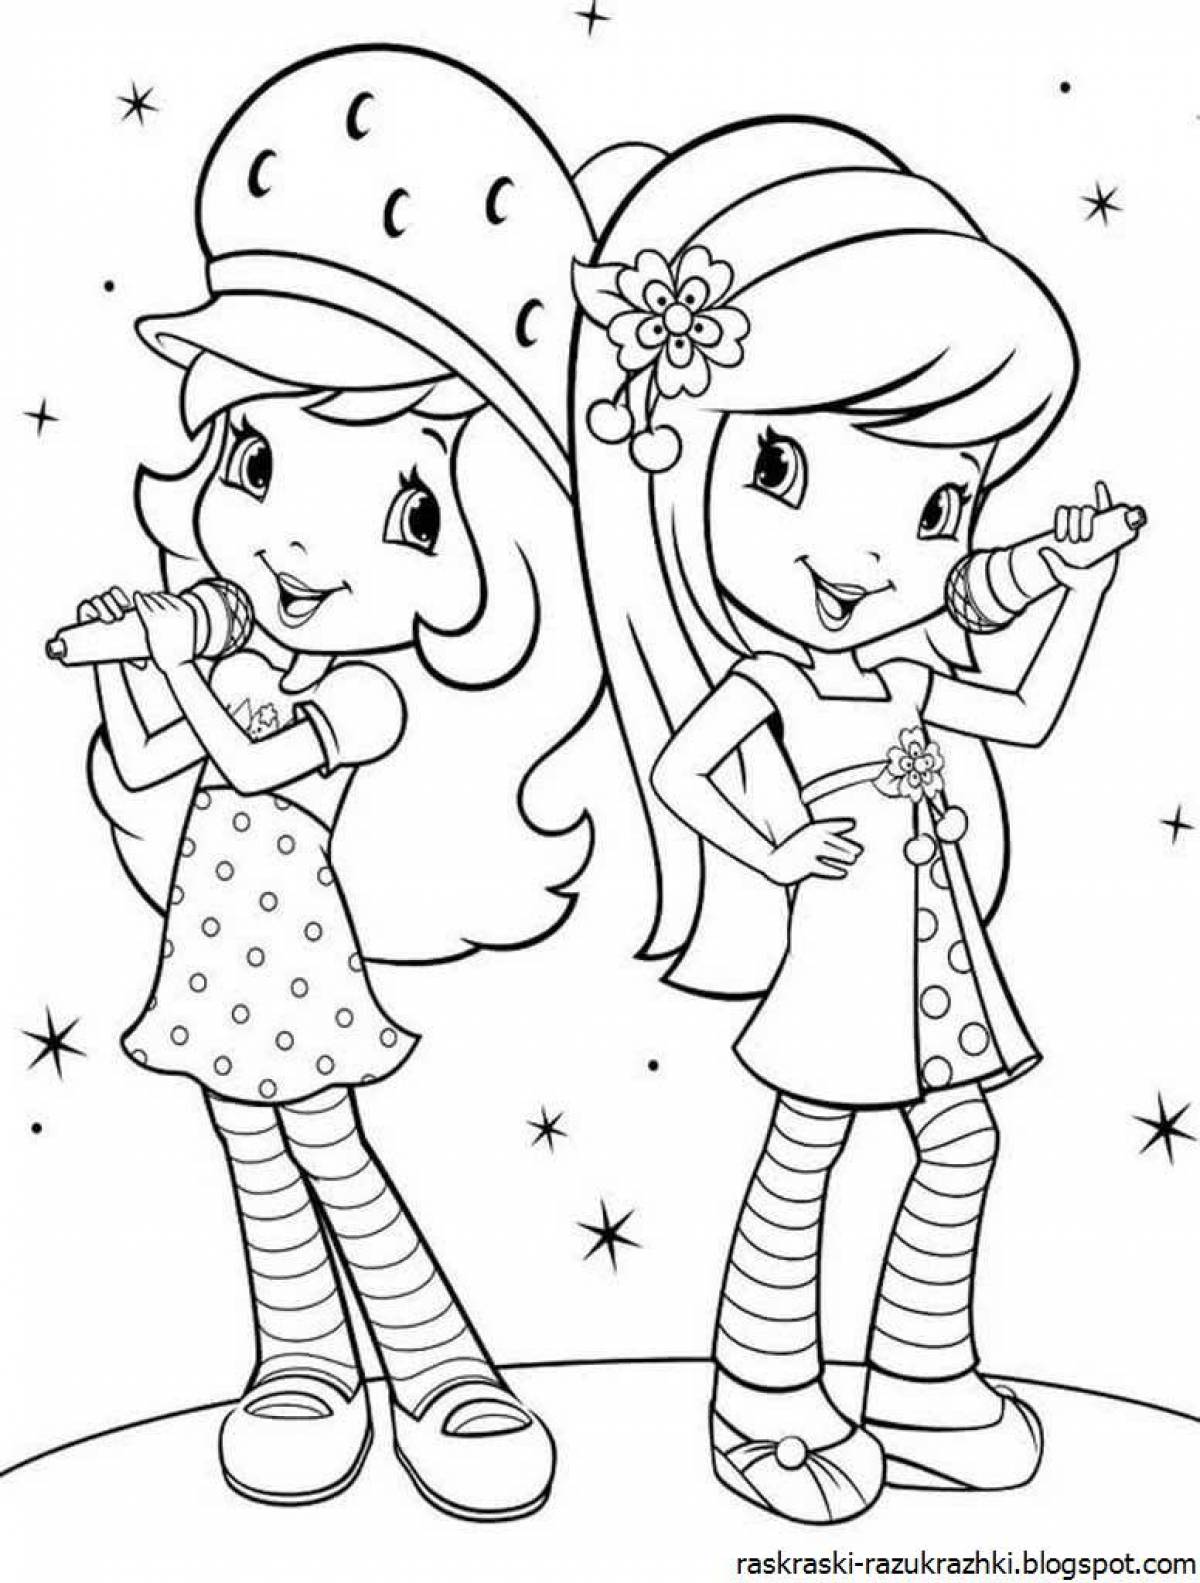 Adorable coloring pages for girls